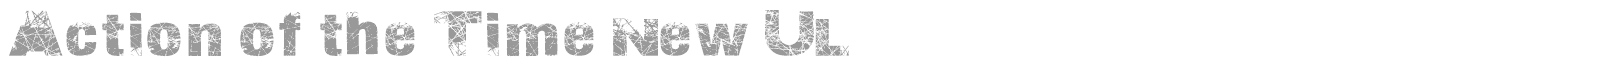 Font Action of the Time New UL